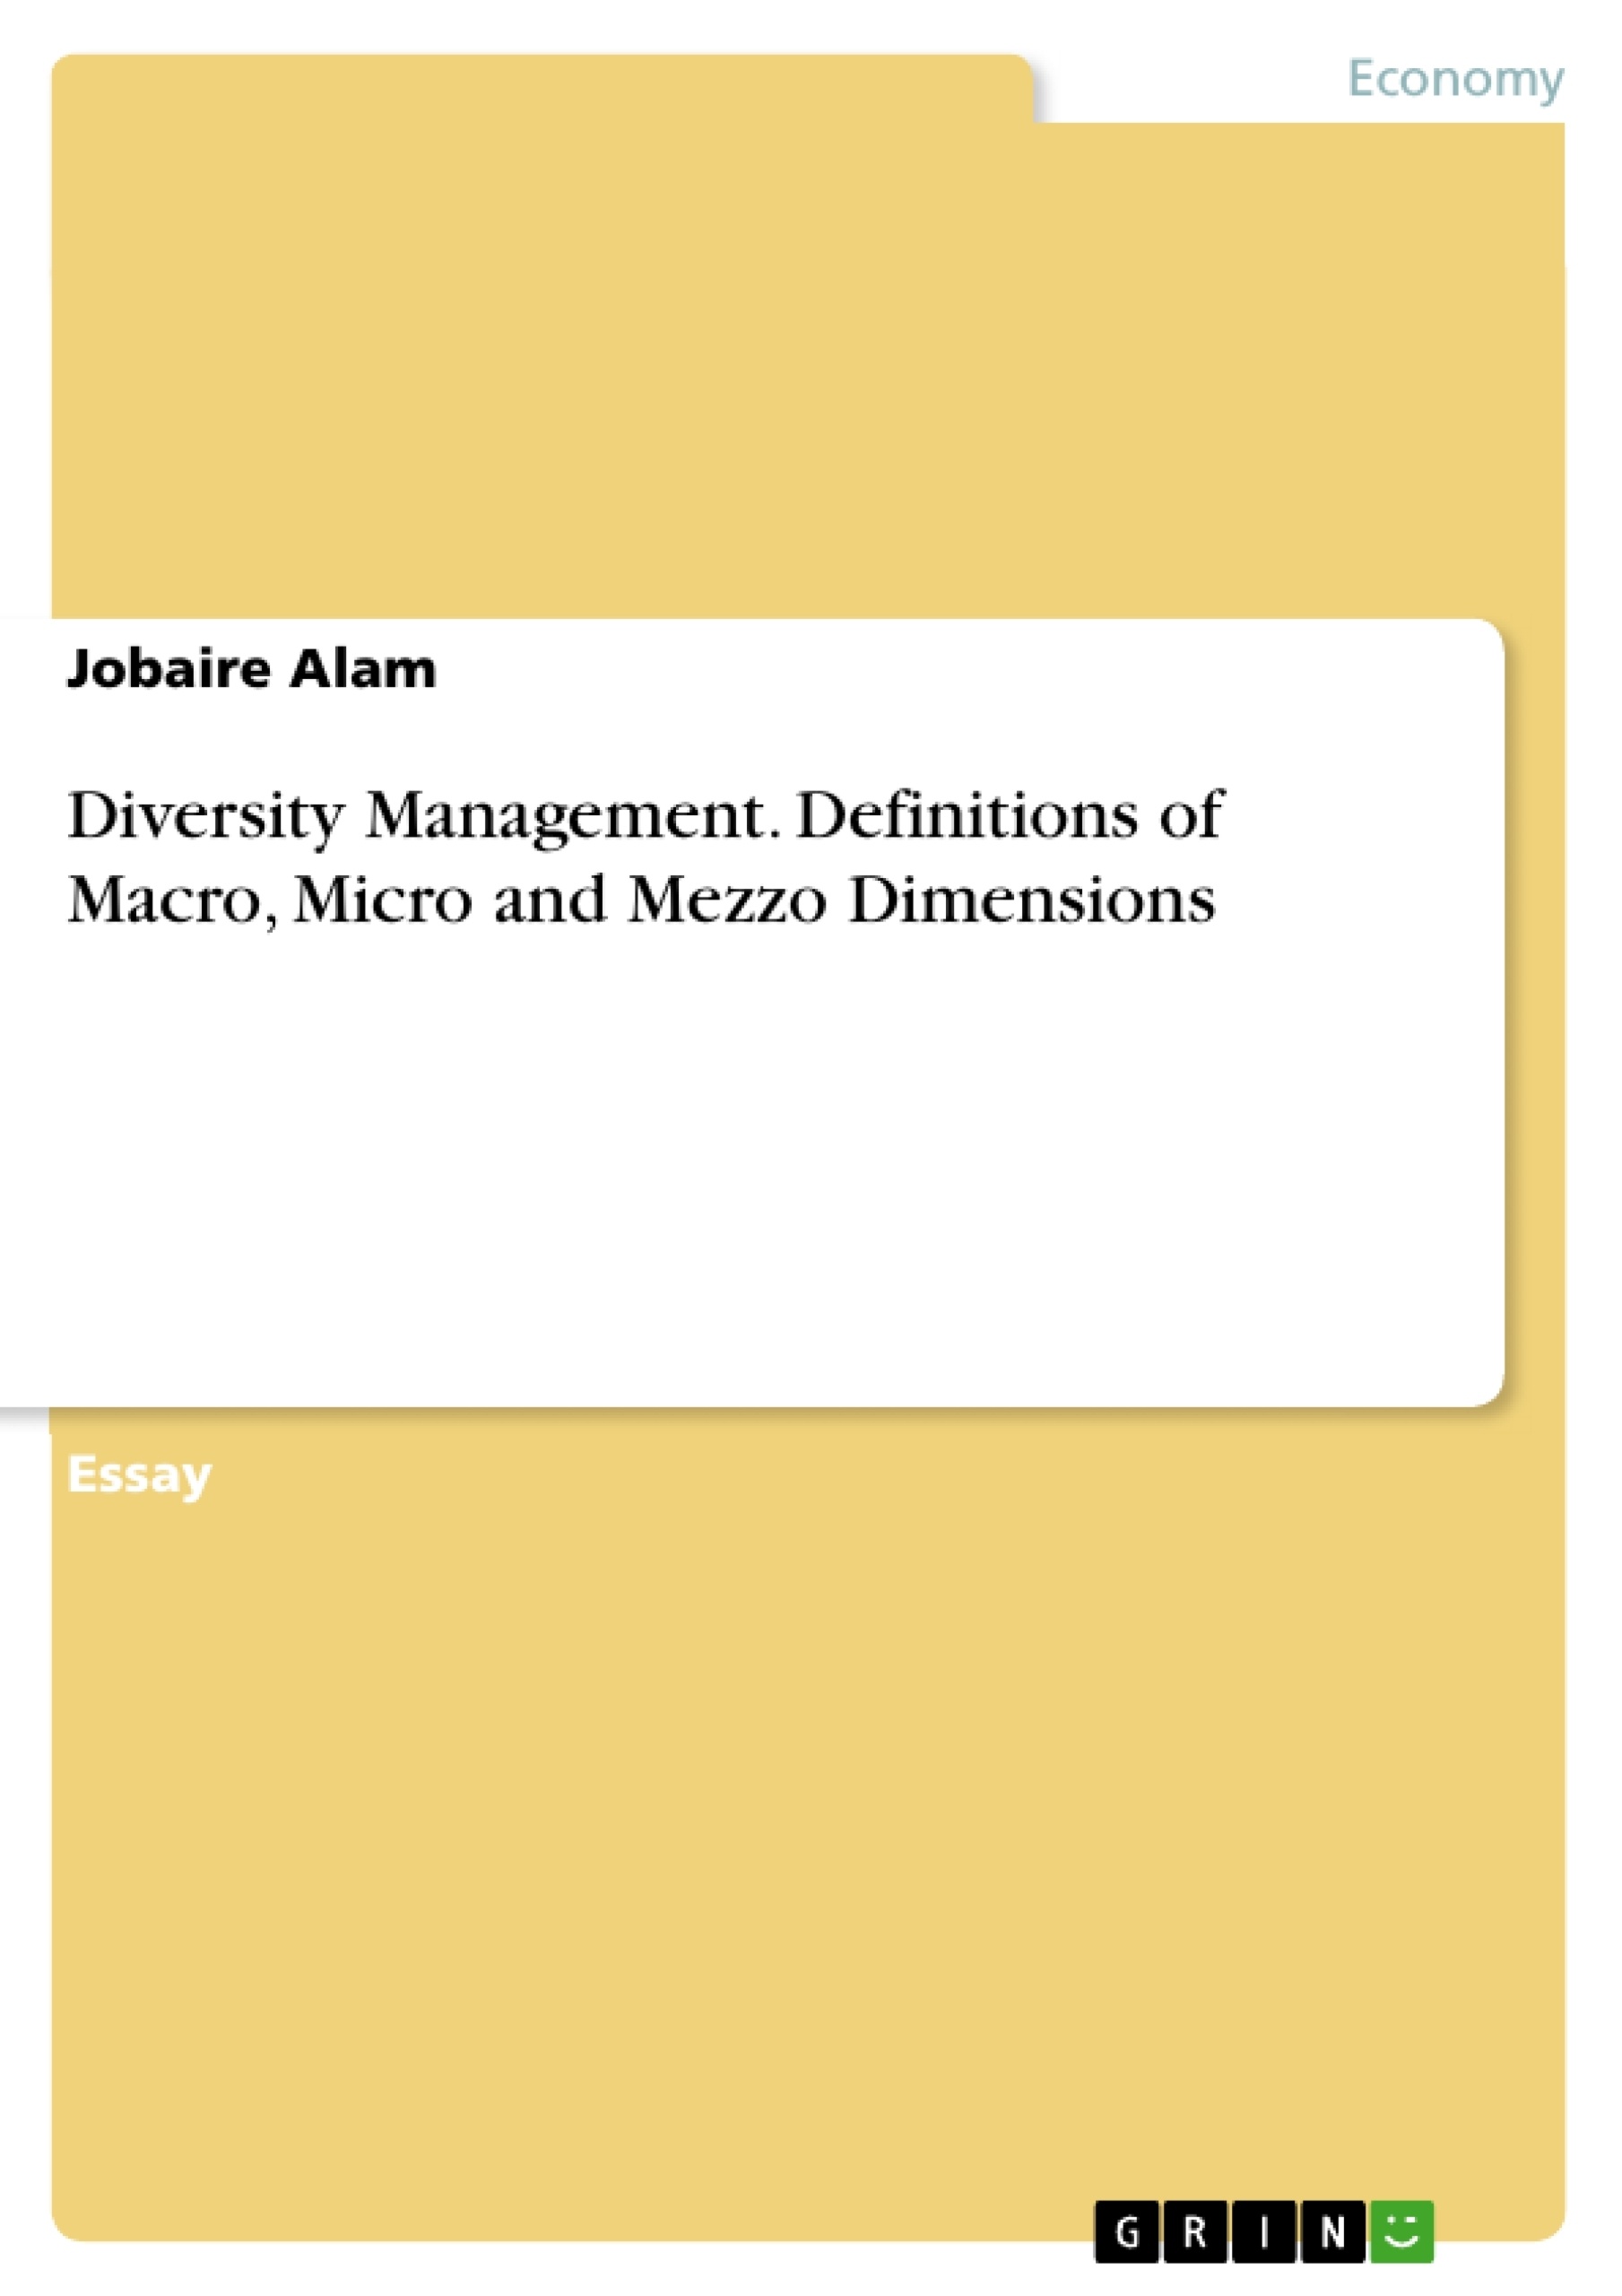 Título: Diversity Management. Definitions of Macro, Micro and Mezzo Dimensions